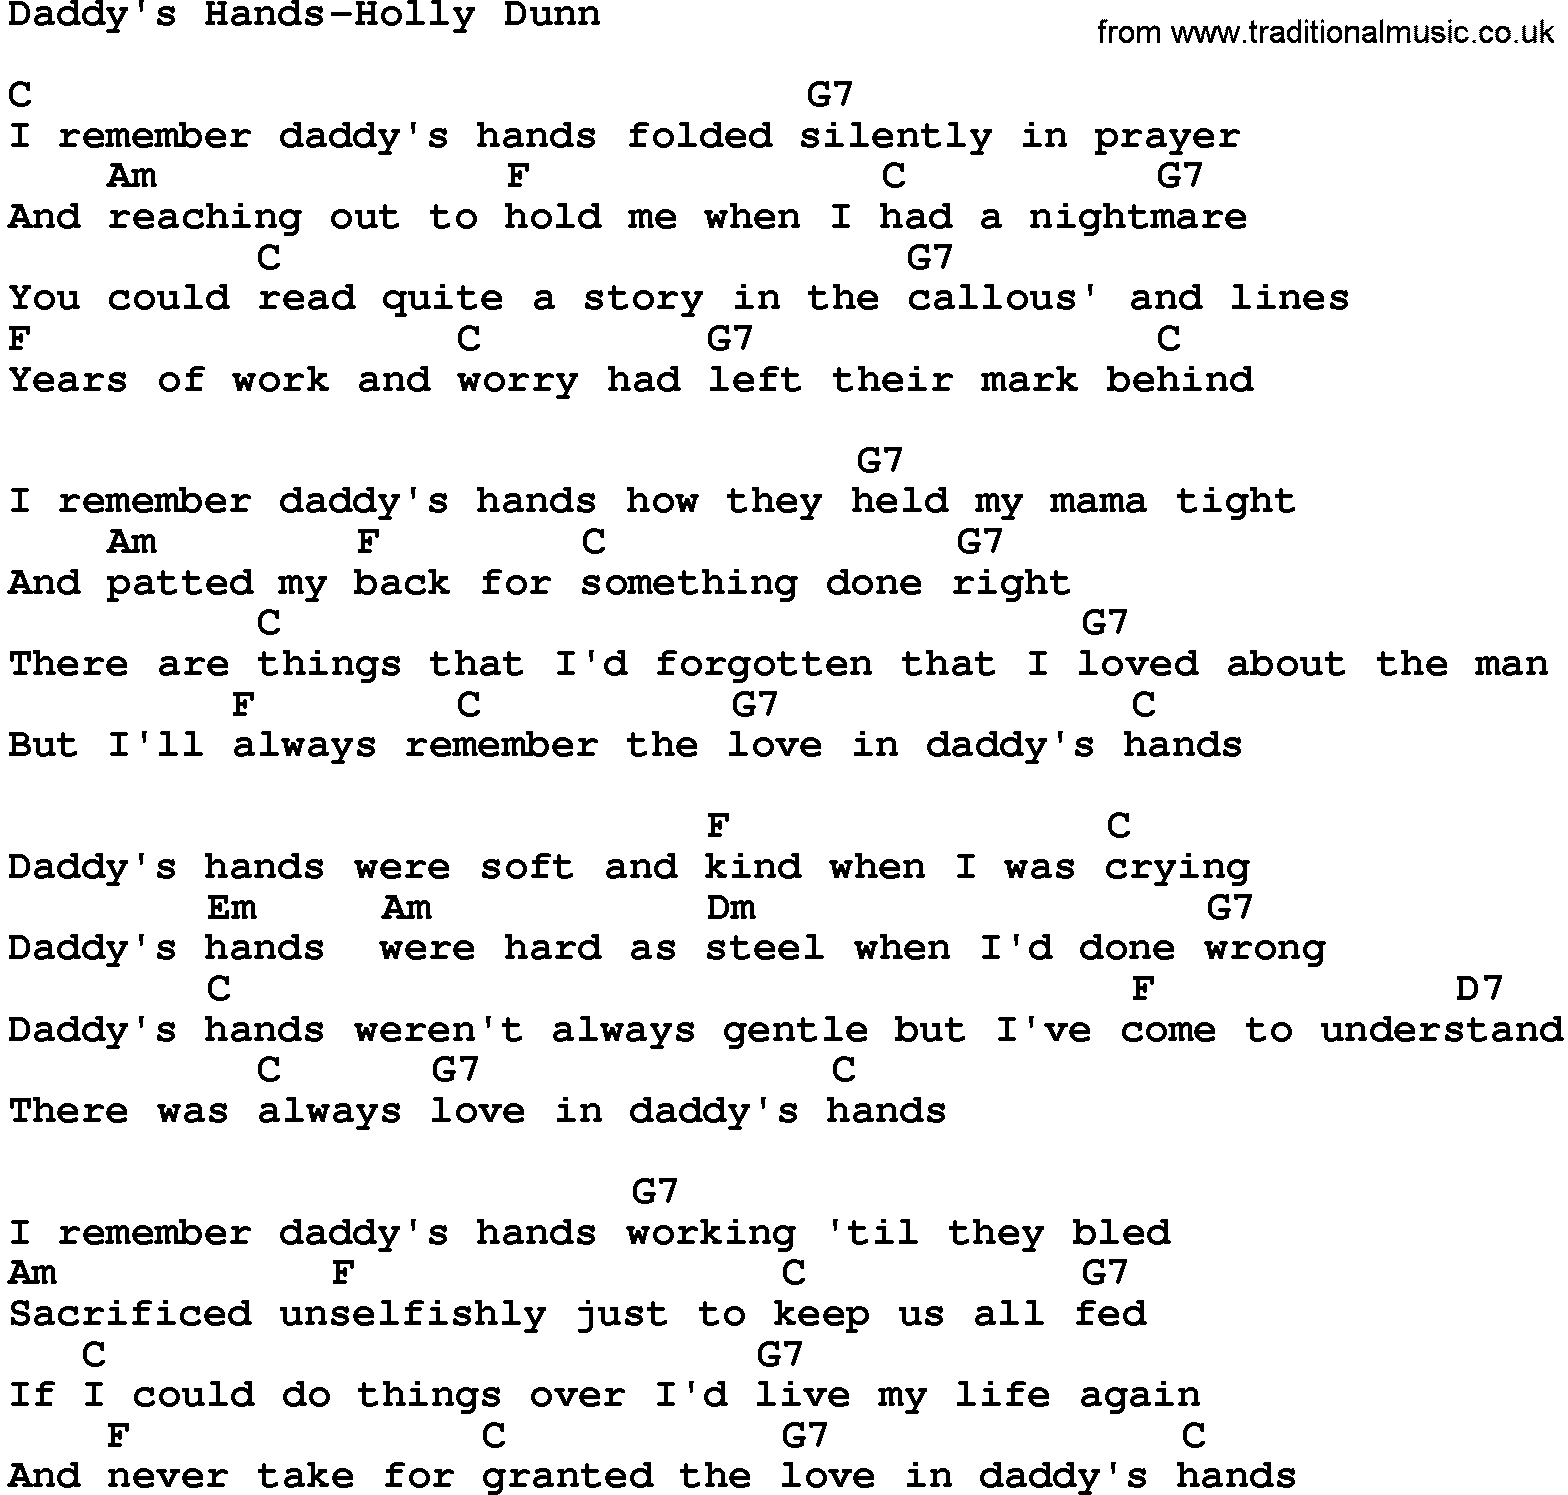 Country music song: Daddy's Hands-Holly Dunn lyrics and chords